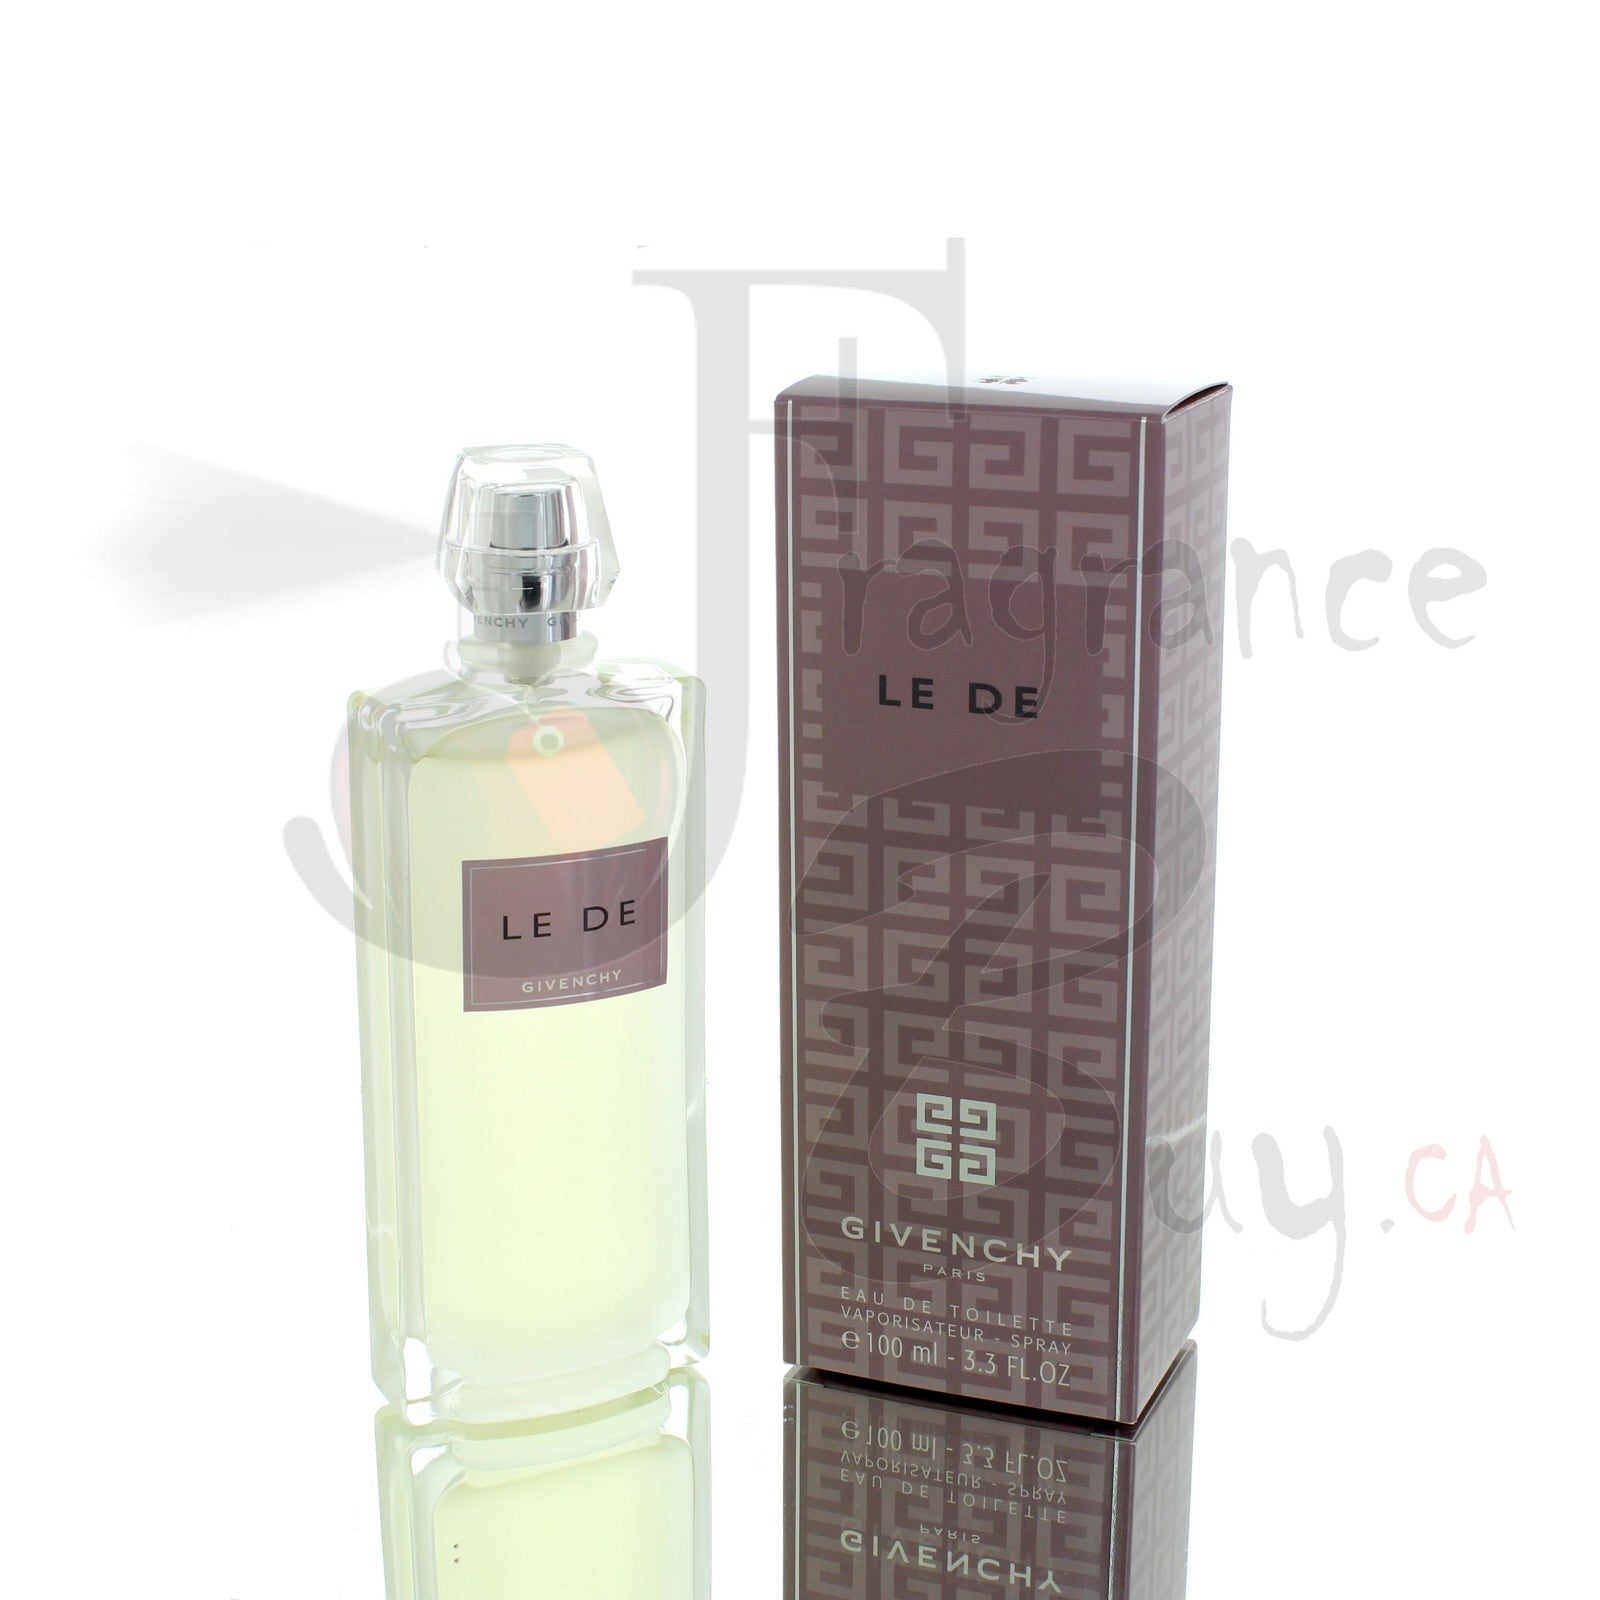  — Givenchy LE DE Givenchy Perfume | Best Price,  Fragrancebuy Canada